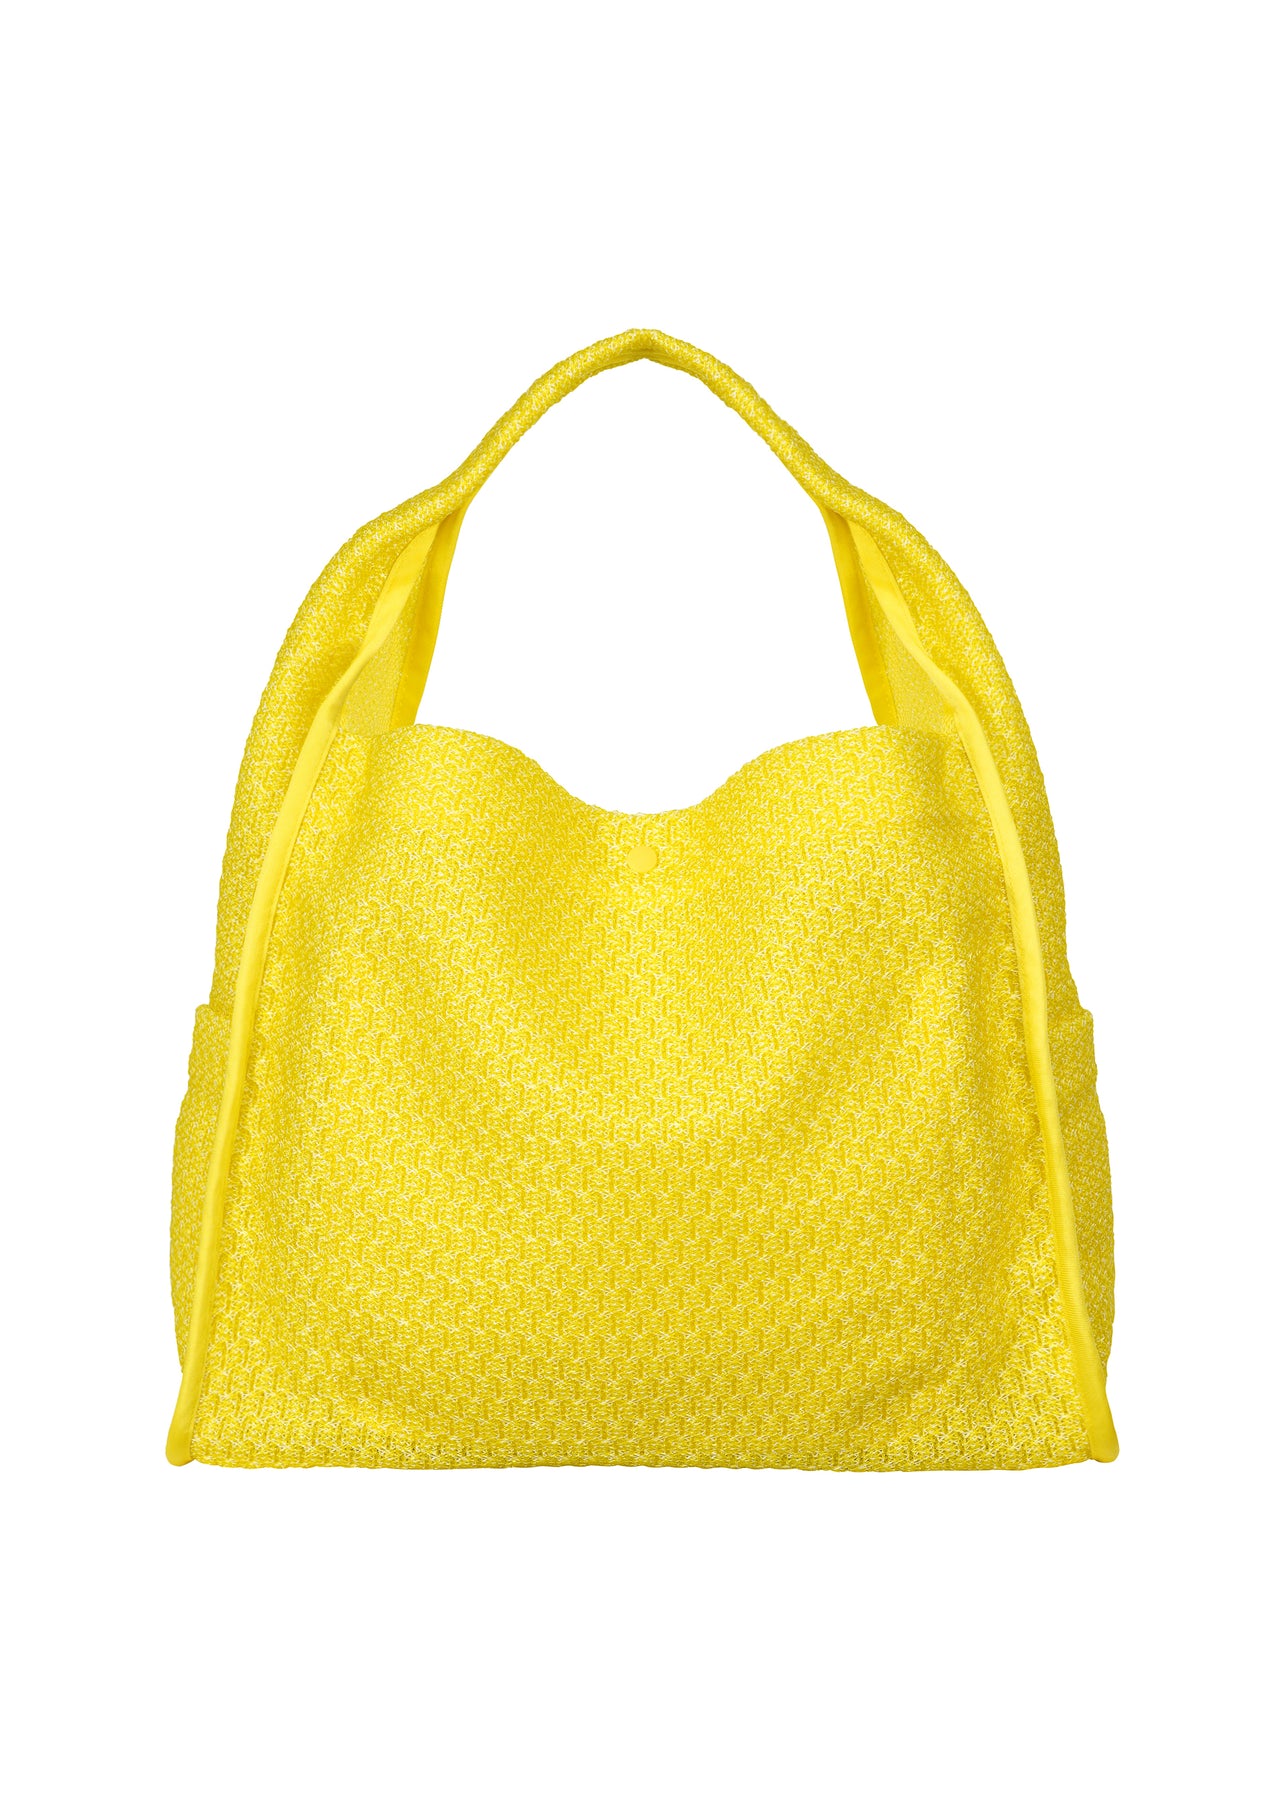 MESH BAG, The official ISSEY MIYAKE ONLINE STORE